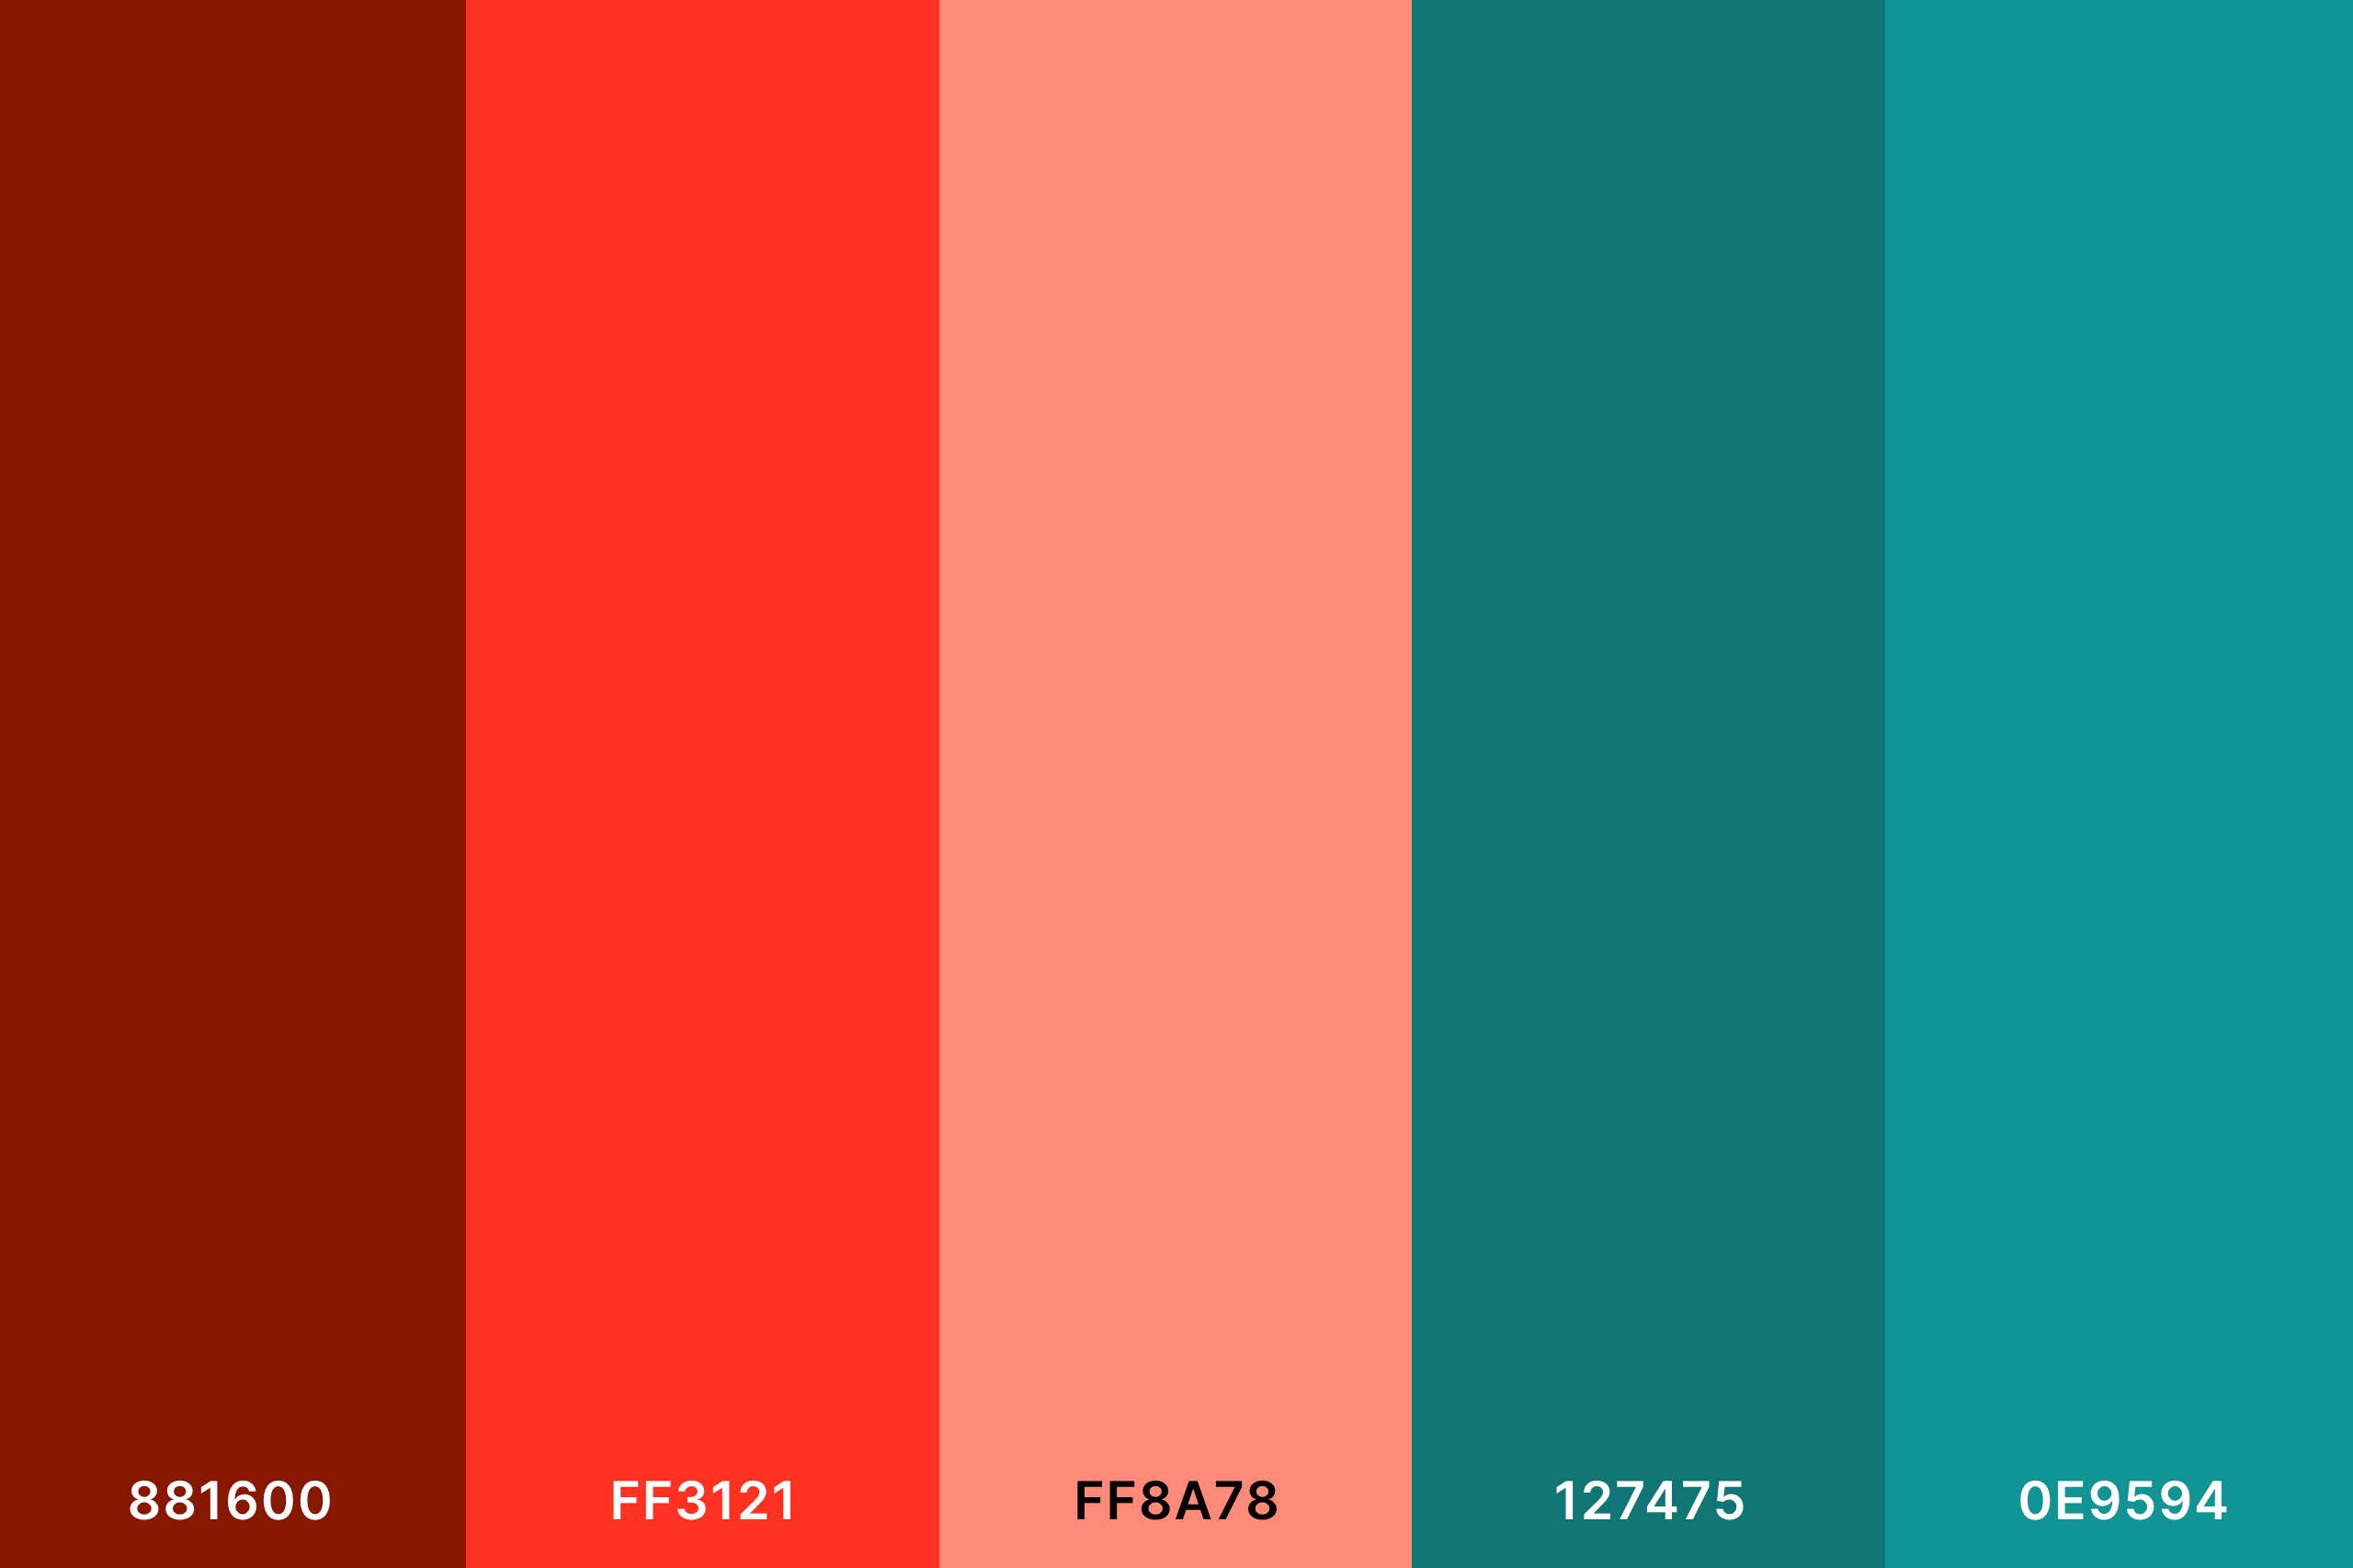 Neon Peach Color Palette with Dark Red (Hex #881600) + Neon Peach (Hex #FF3121) + Salmon (Hex #FF8A78) + Caribbean Current (Hex #127475) + Dark Cyan (Hex #0E9594) Color Palette with Hex Codes